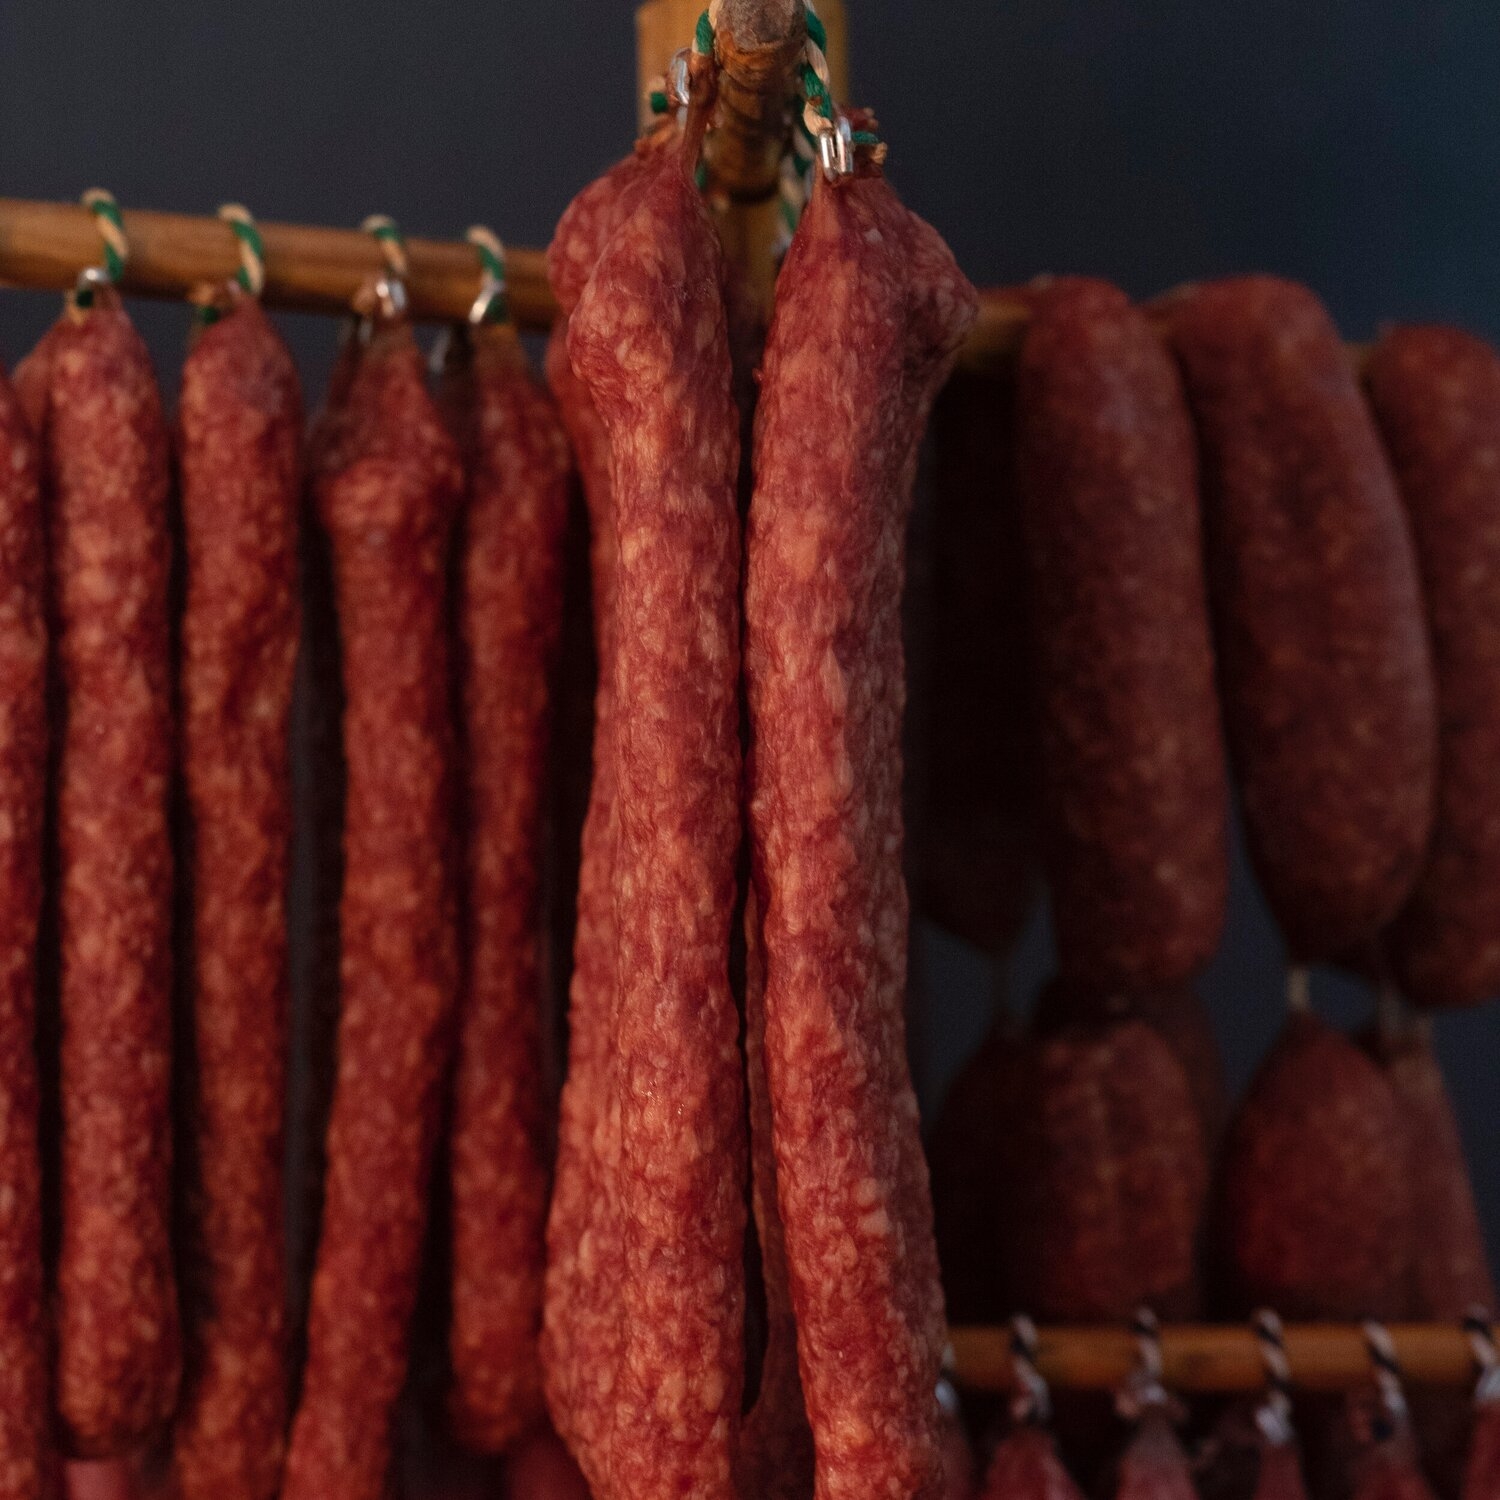 Boerenmetworst – Dutch Charcuterie